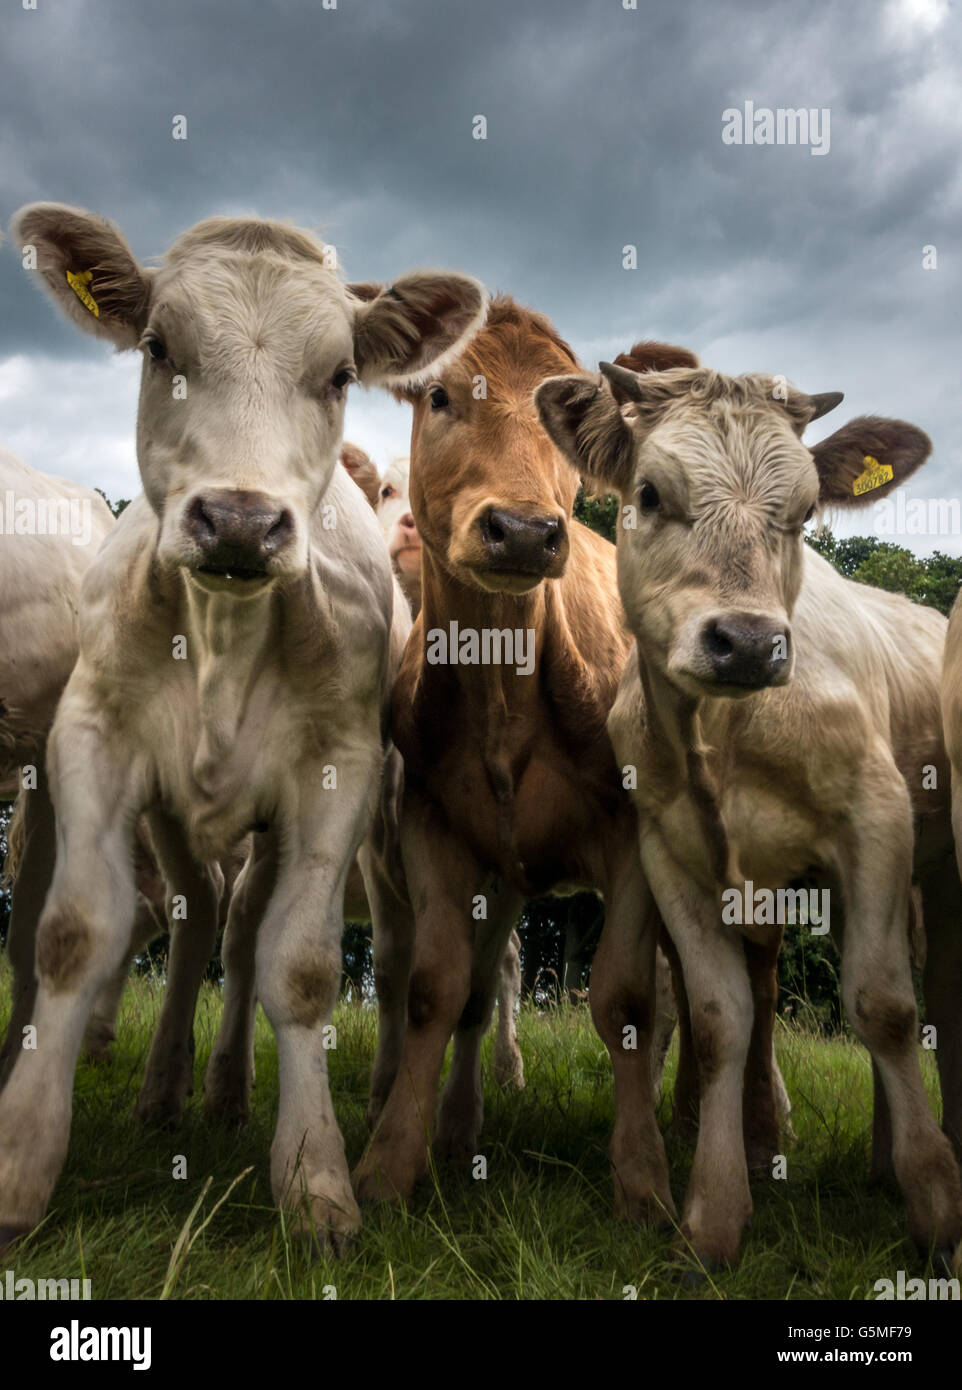 Curious cows taken from a low angle lined up, Yorkshire, UK Stock Photo